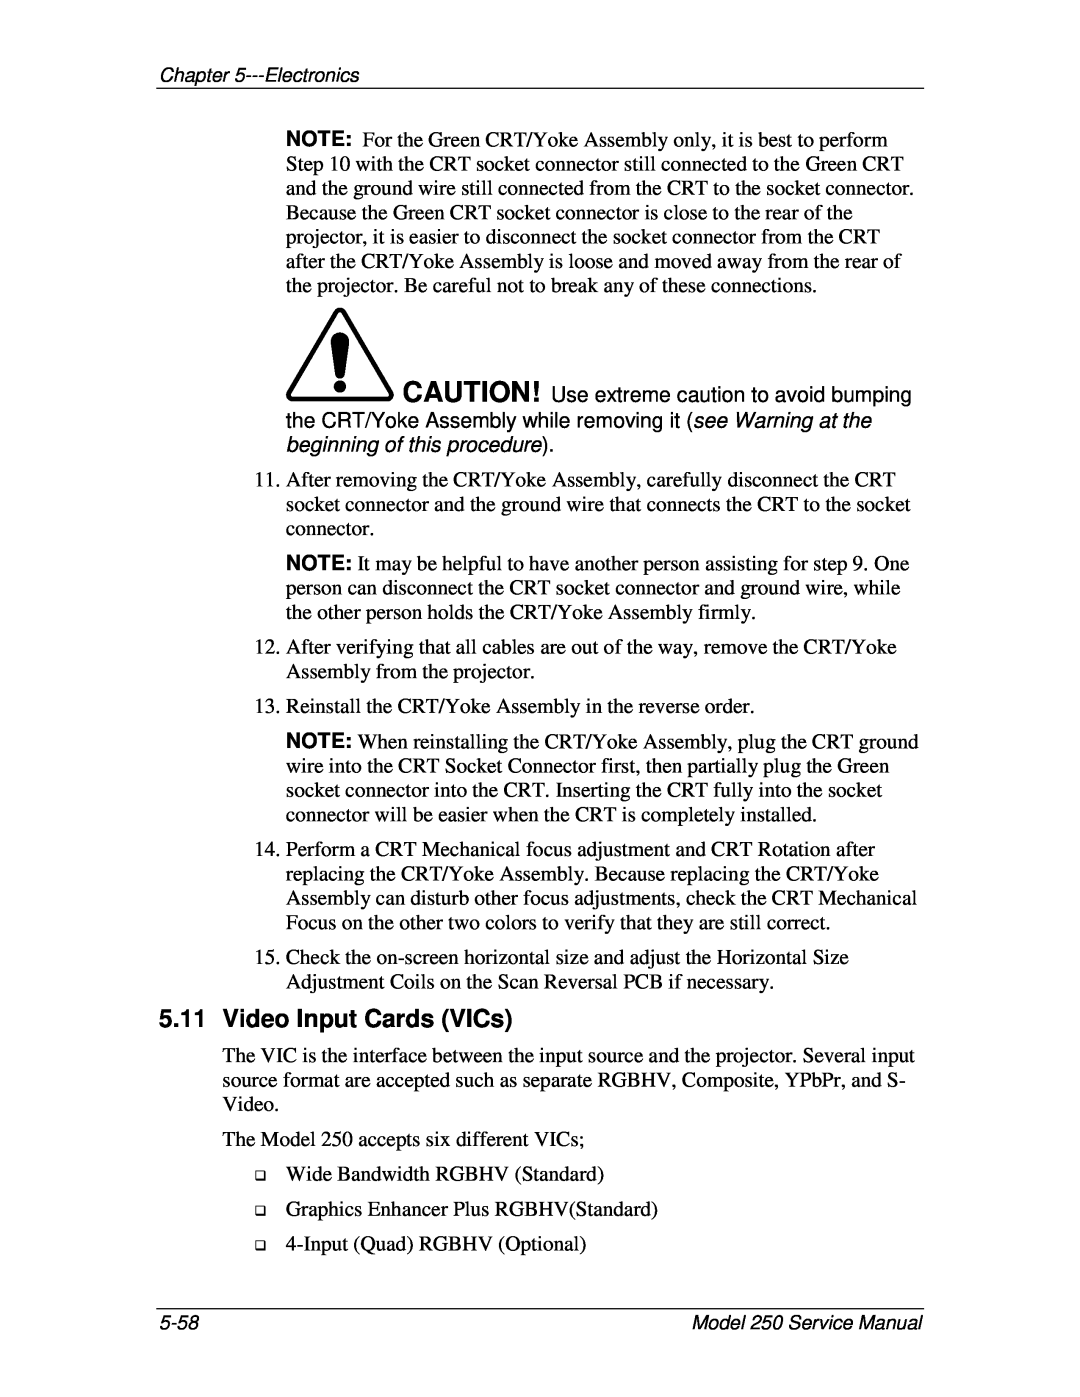 JVC 250 service manual Video Input Cards VICs, CAUTION! Use extreme caution to avoid bumping 